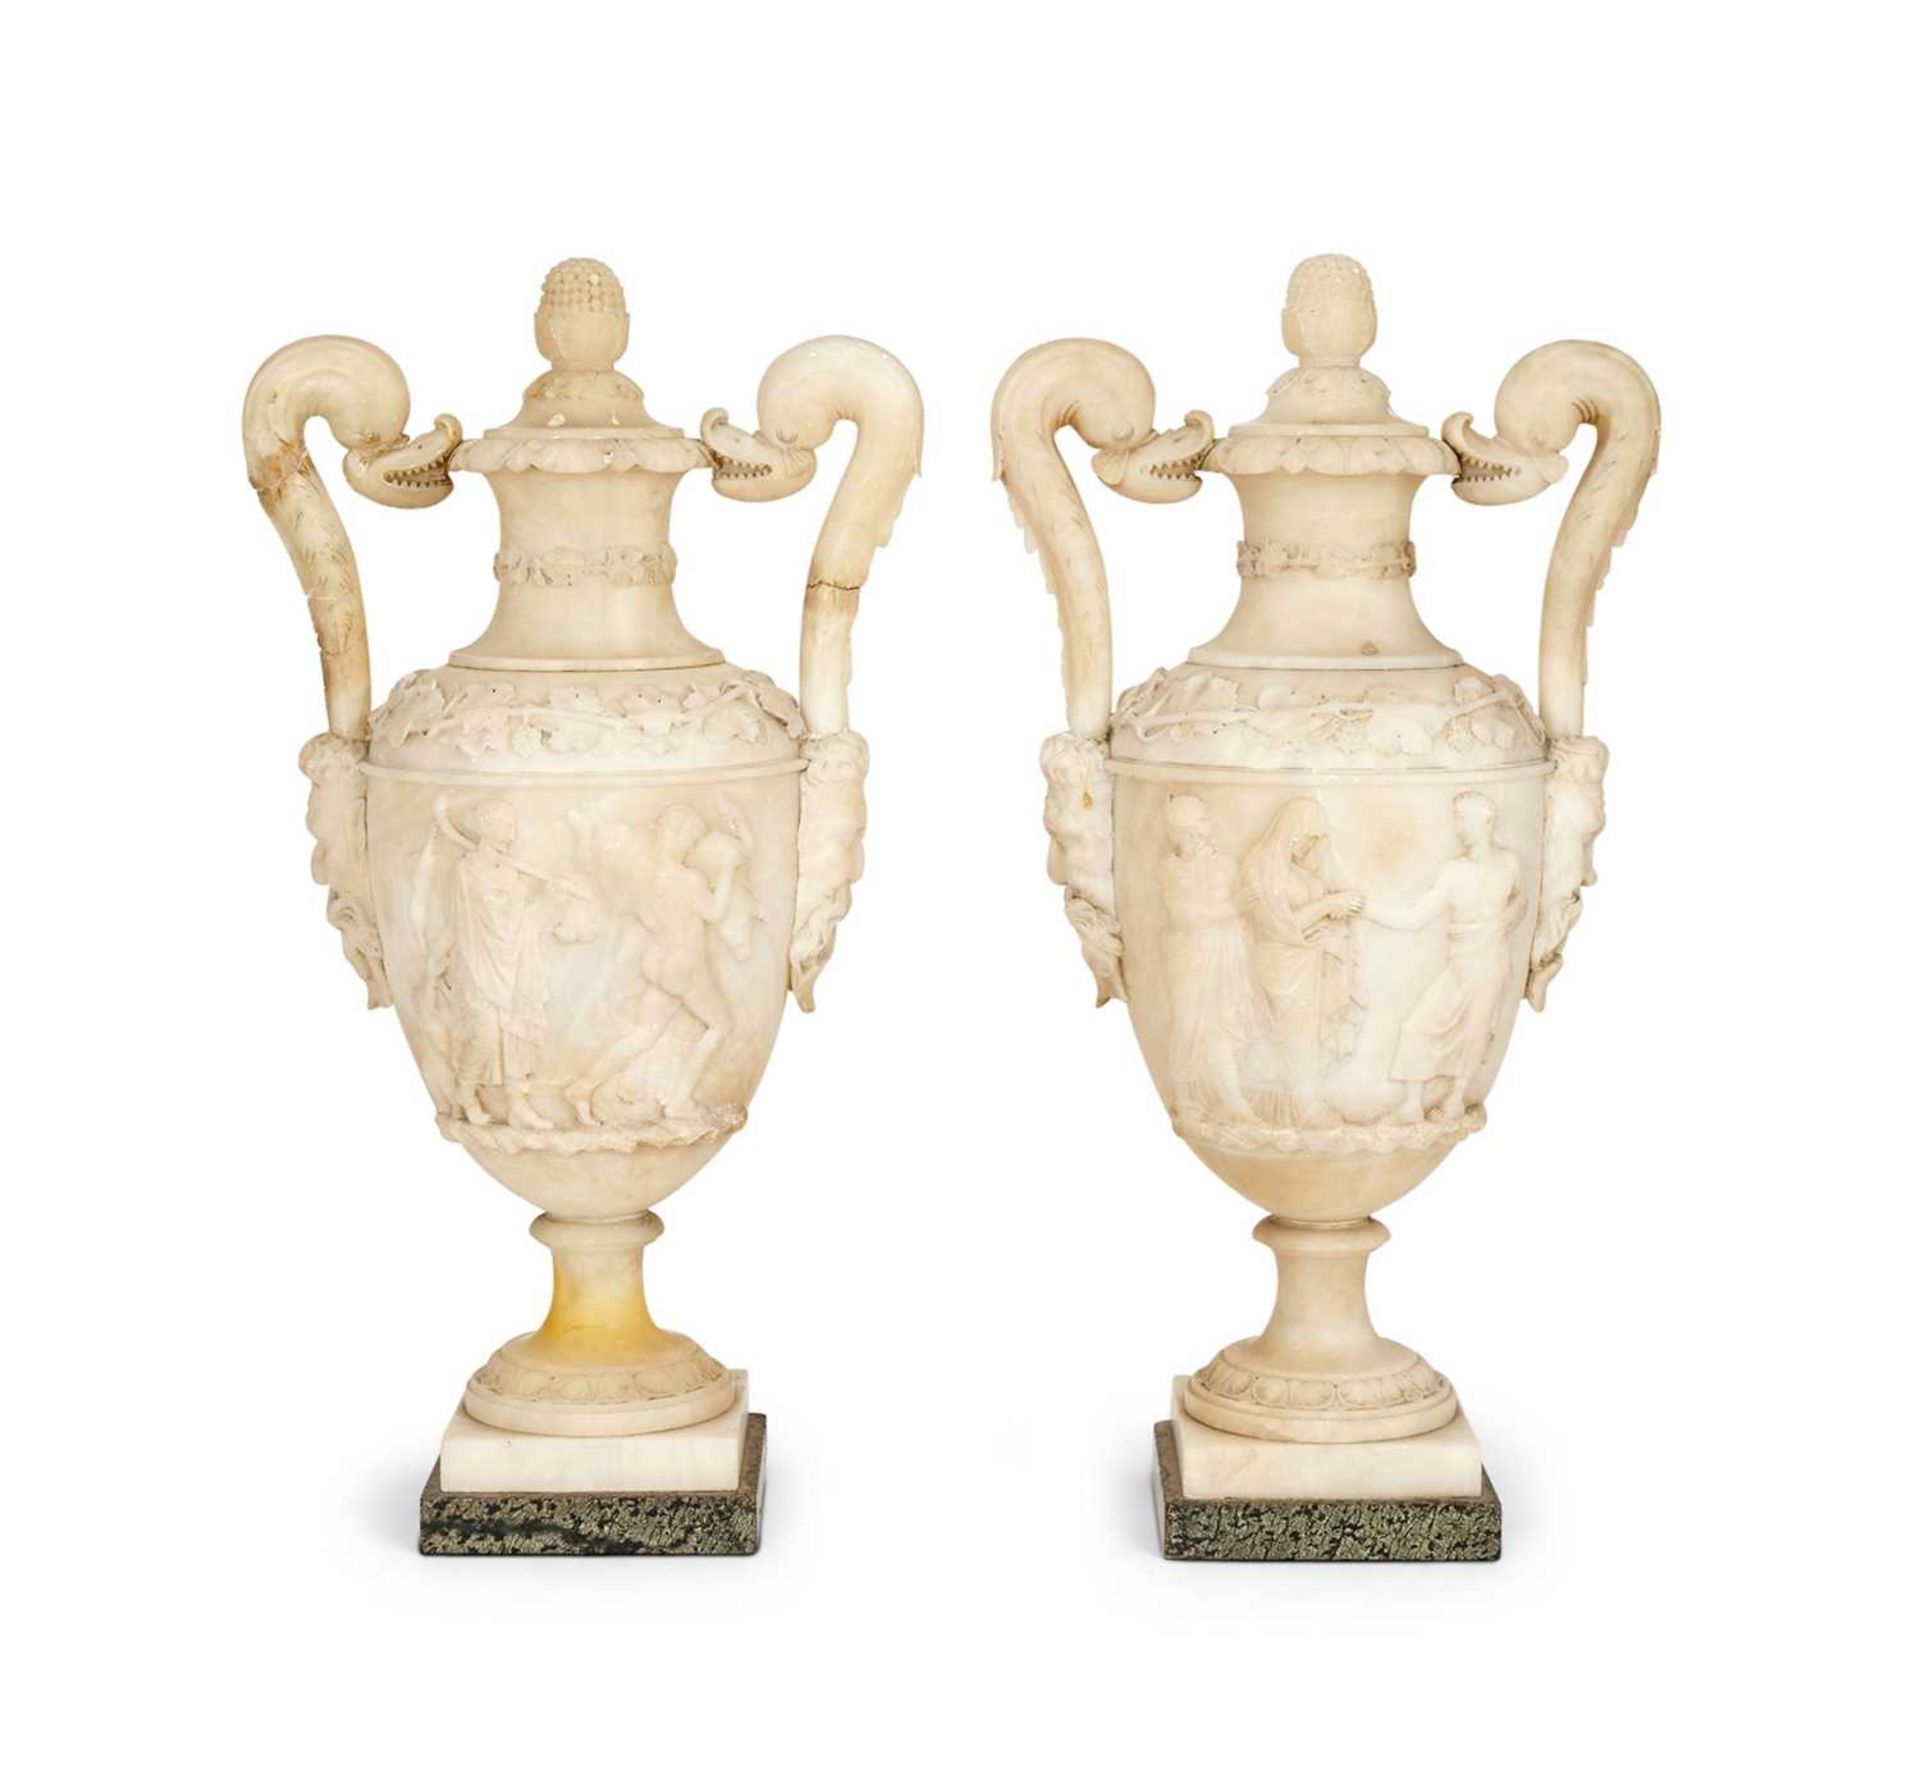 A LARGE PAIR OF 19TH CENTURY ITALIAN ALABASTER URNS AND COVERS IN THE STYLE OF PIRANESI - Image 3 of 12